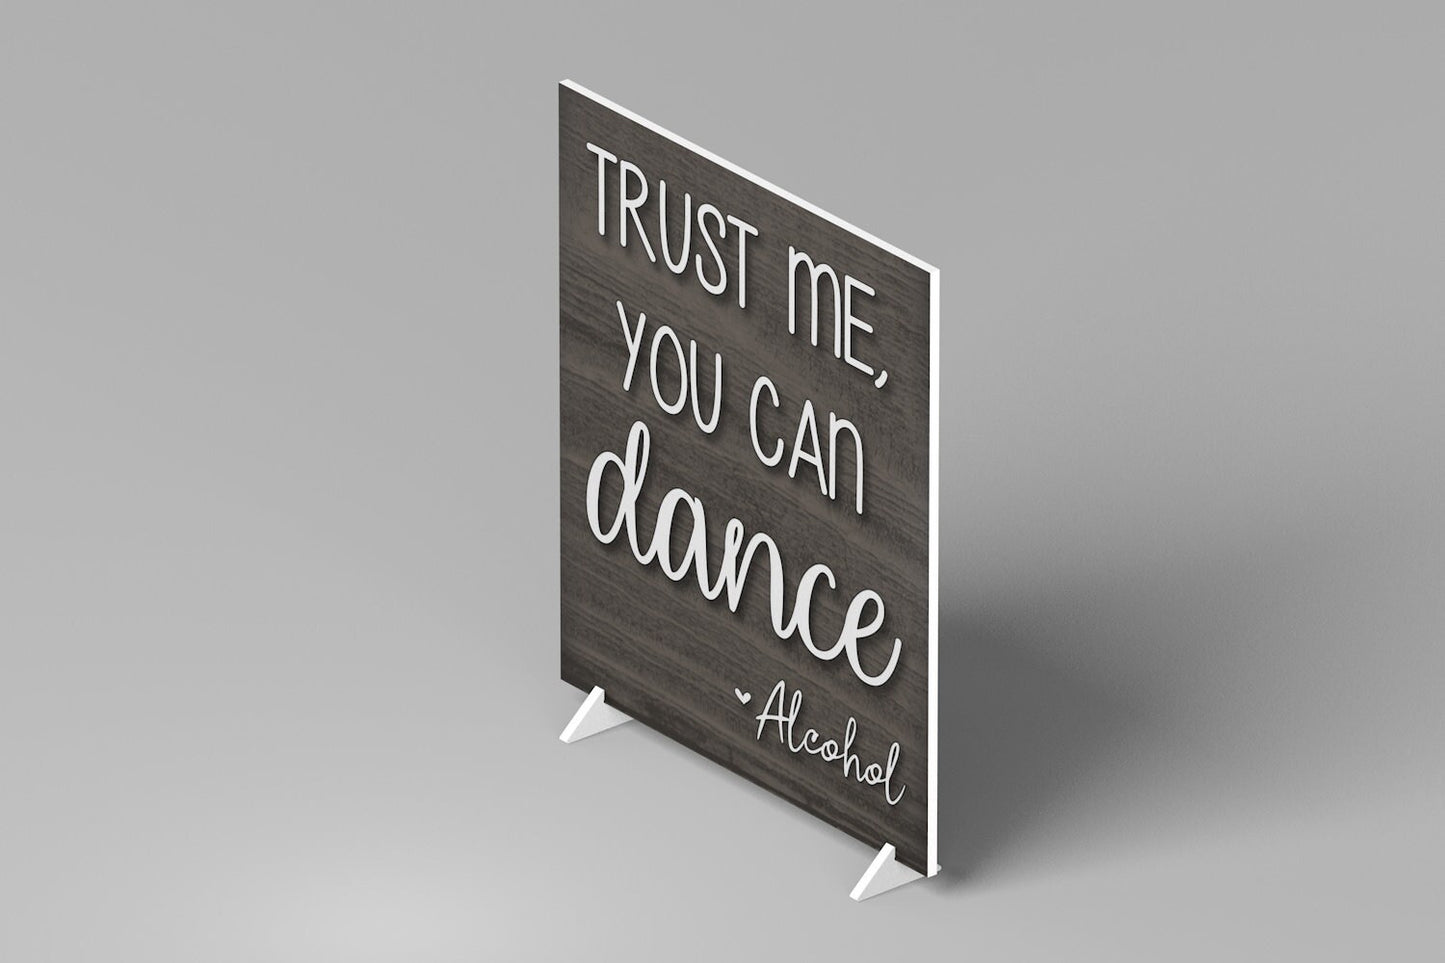 Wedding Reception Bar Sign, Trust Me You Can Dance - Alcohol Sign